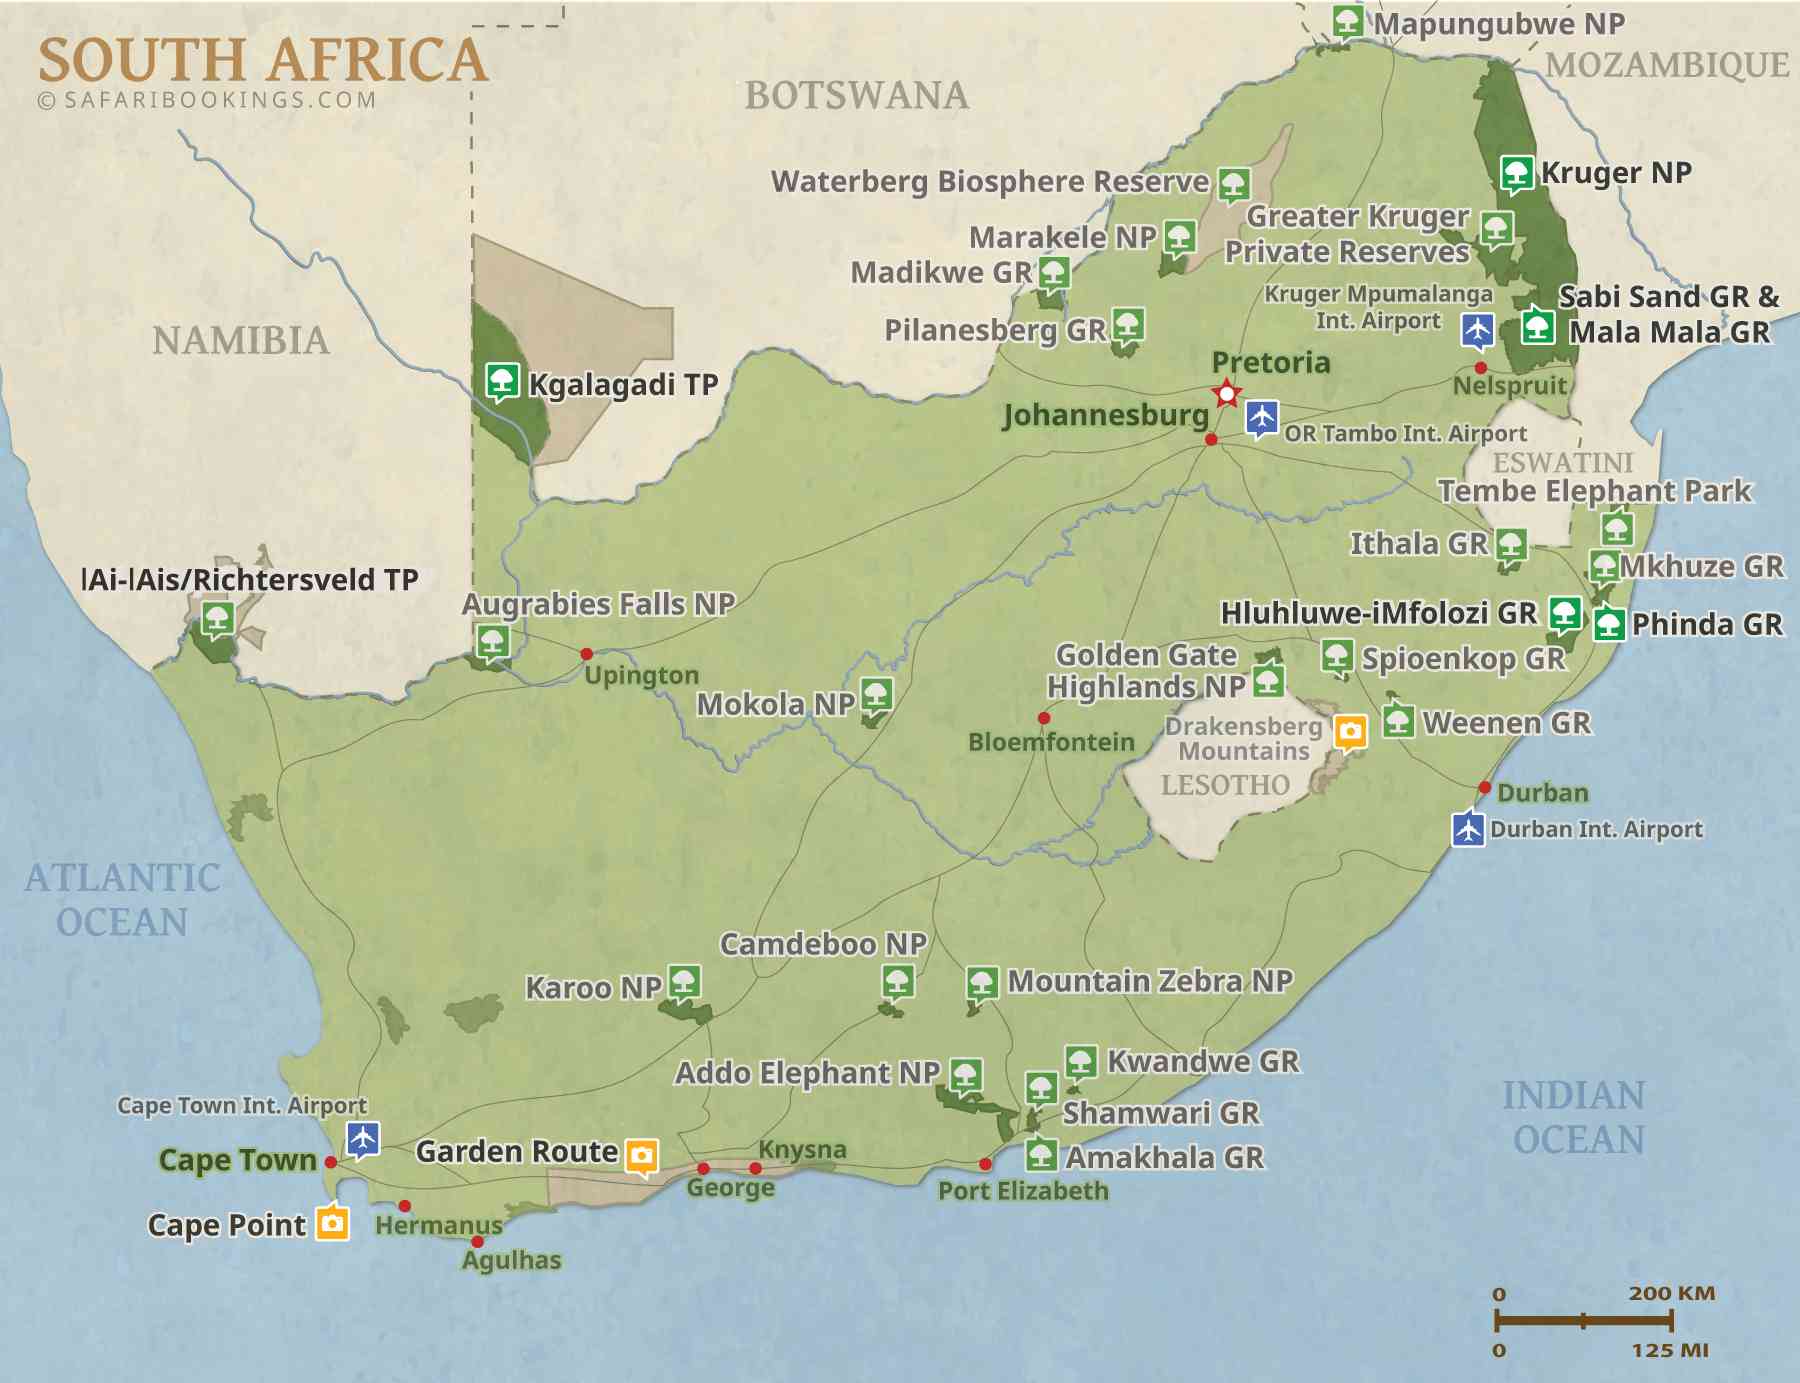 Popular Routes in South Africa